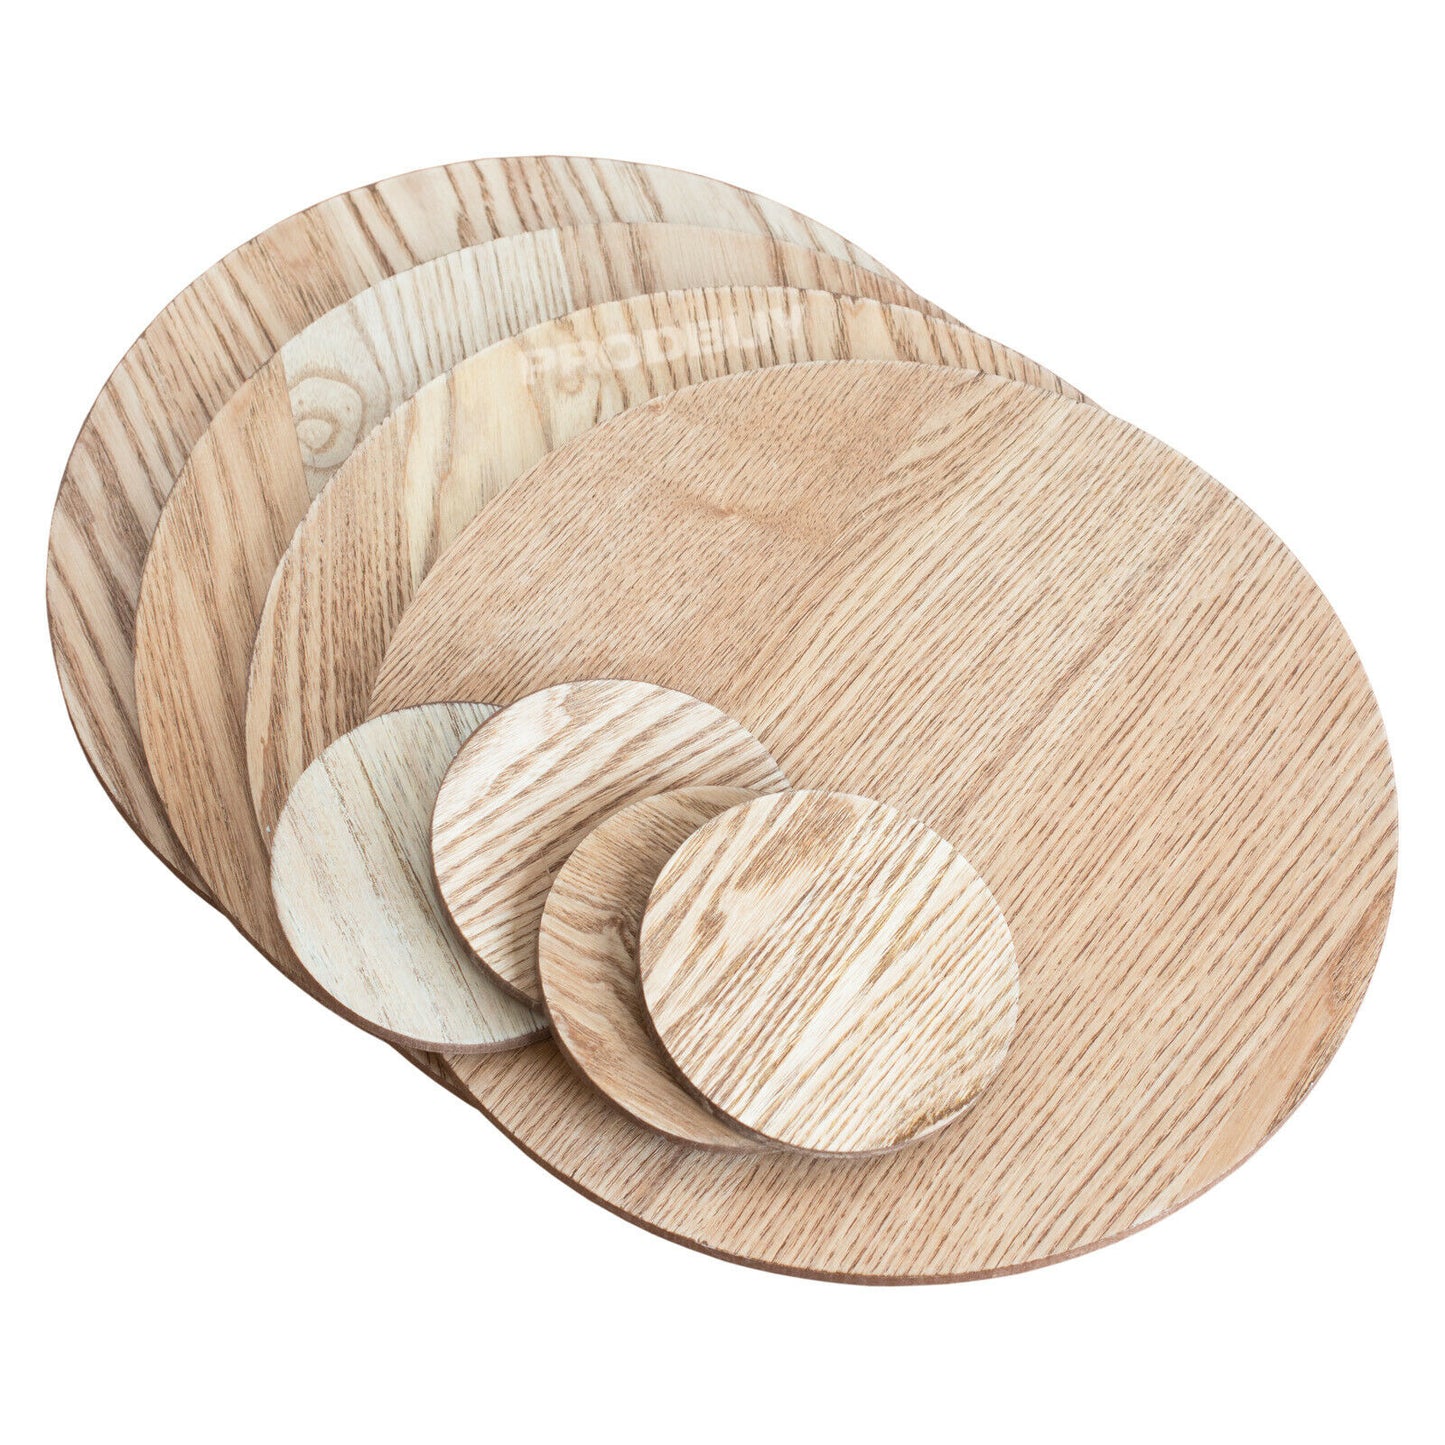 Round Wooden Veneer 4 x Placemats and 4 x Coasters Set